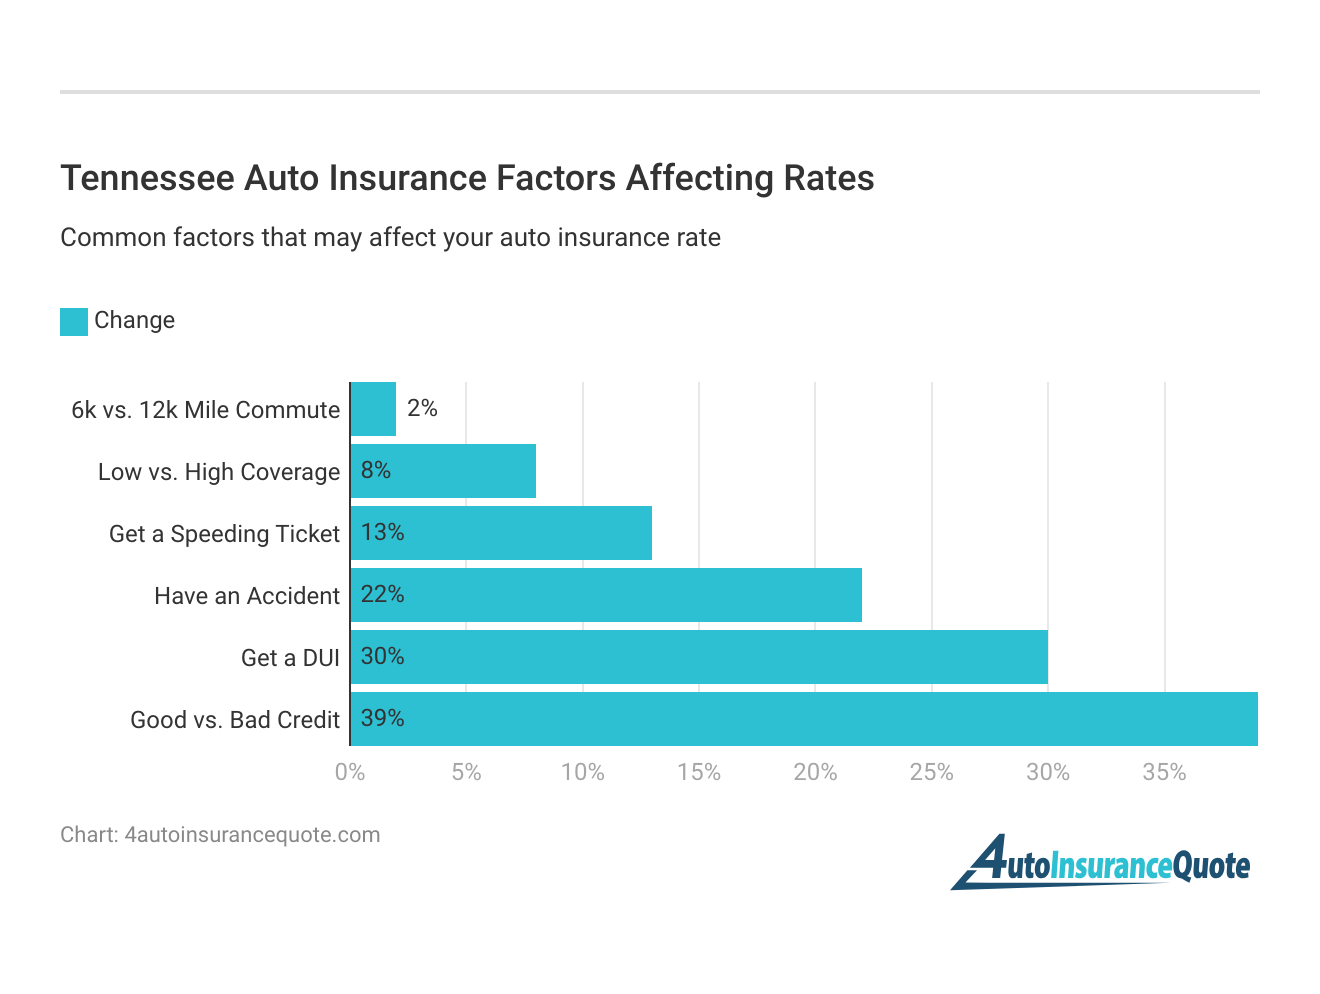 <h3>Tennessee Auto Insurance Factors Affecting Rates</h3>